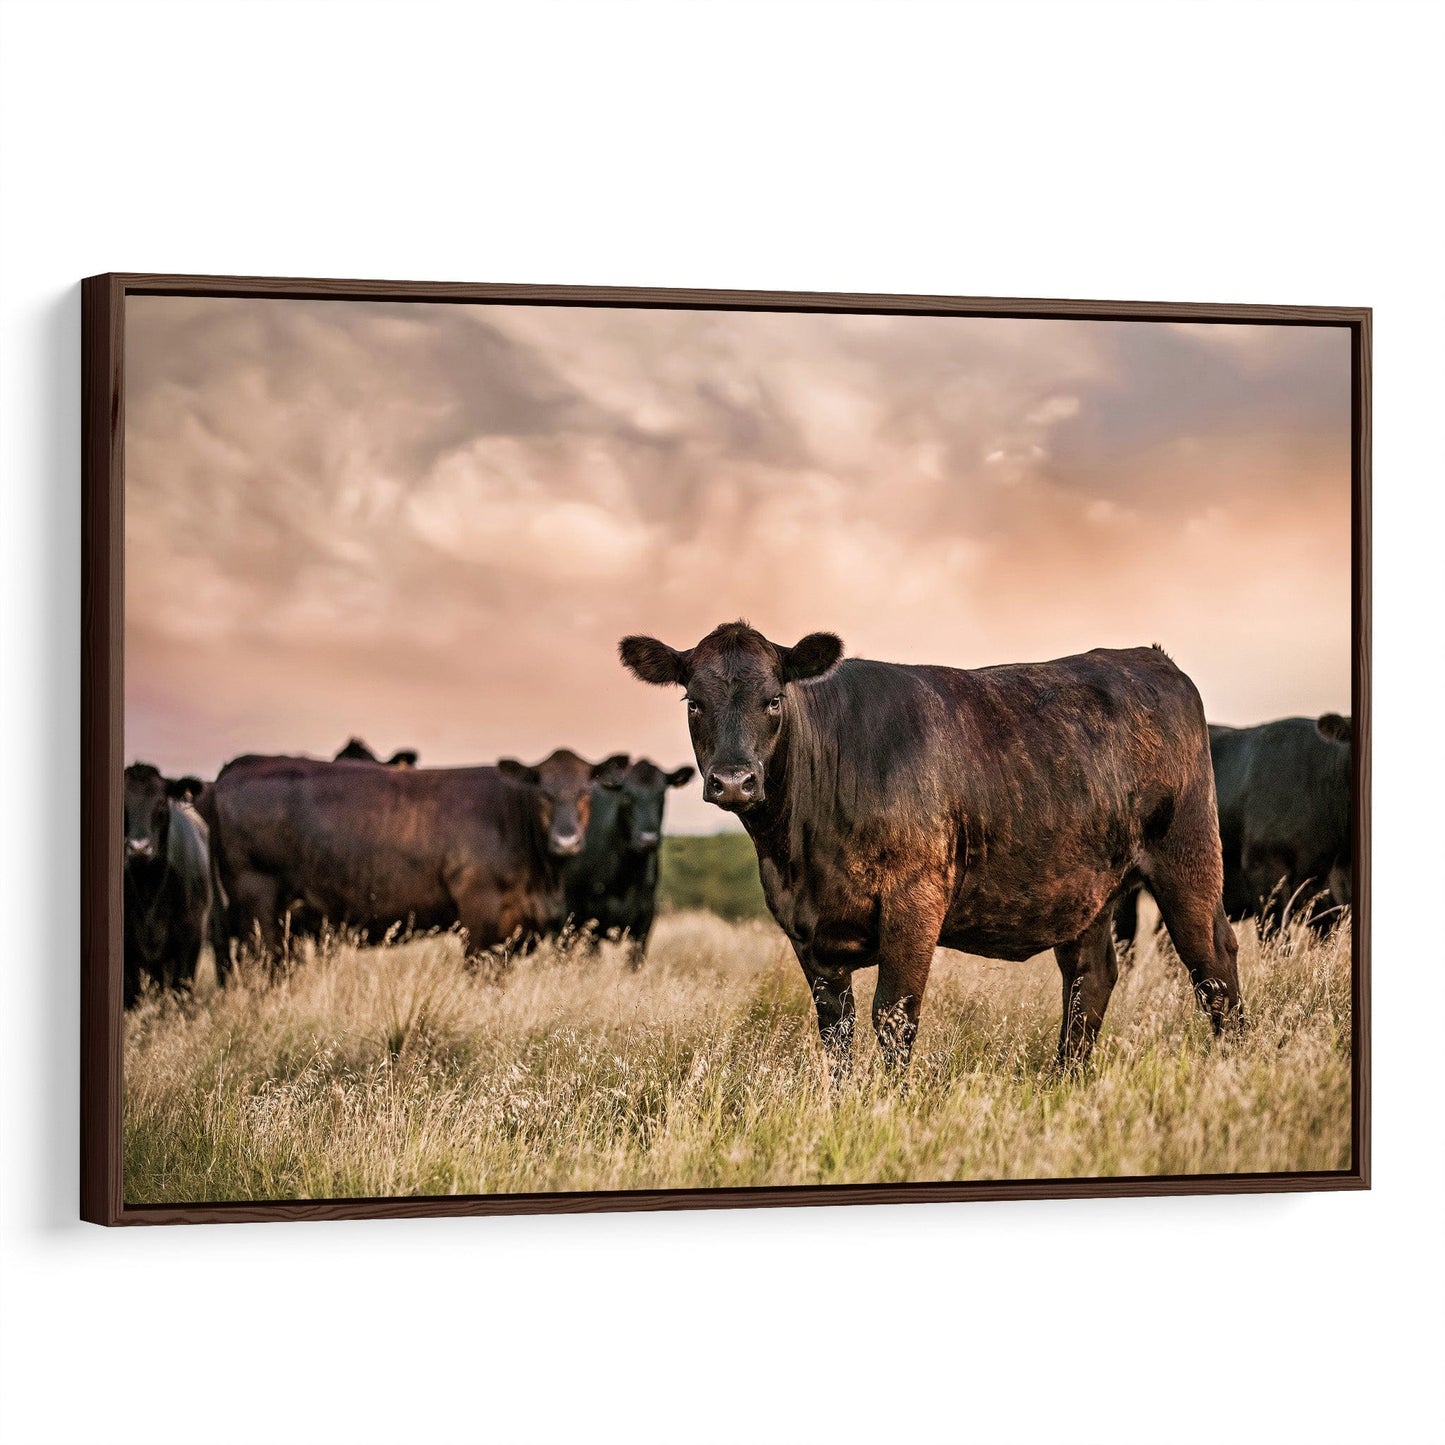 Black Angus Cattle at Sunset - Angus Cows Wall Art Canvas Canvas-Walnut Frame / 12 x 18 Inches Wall Art Teri James Photography